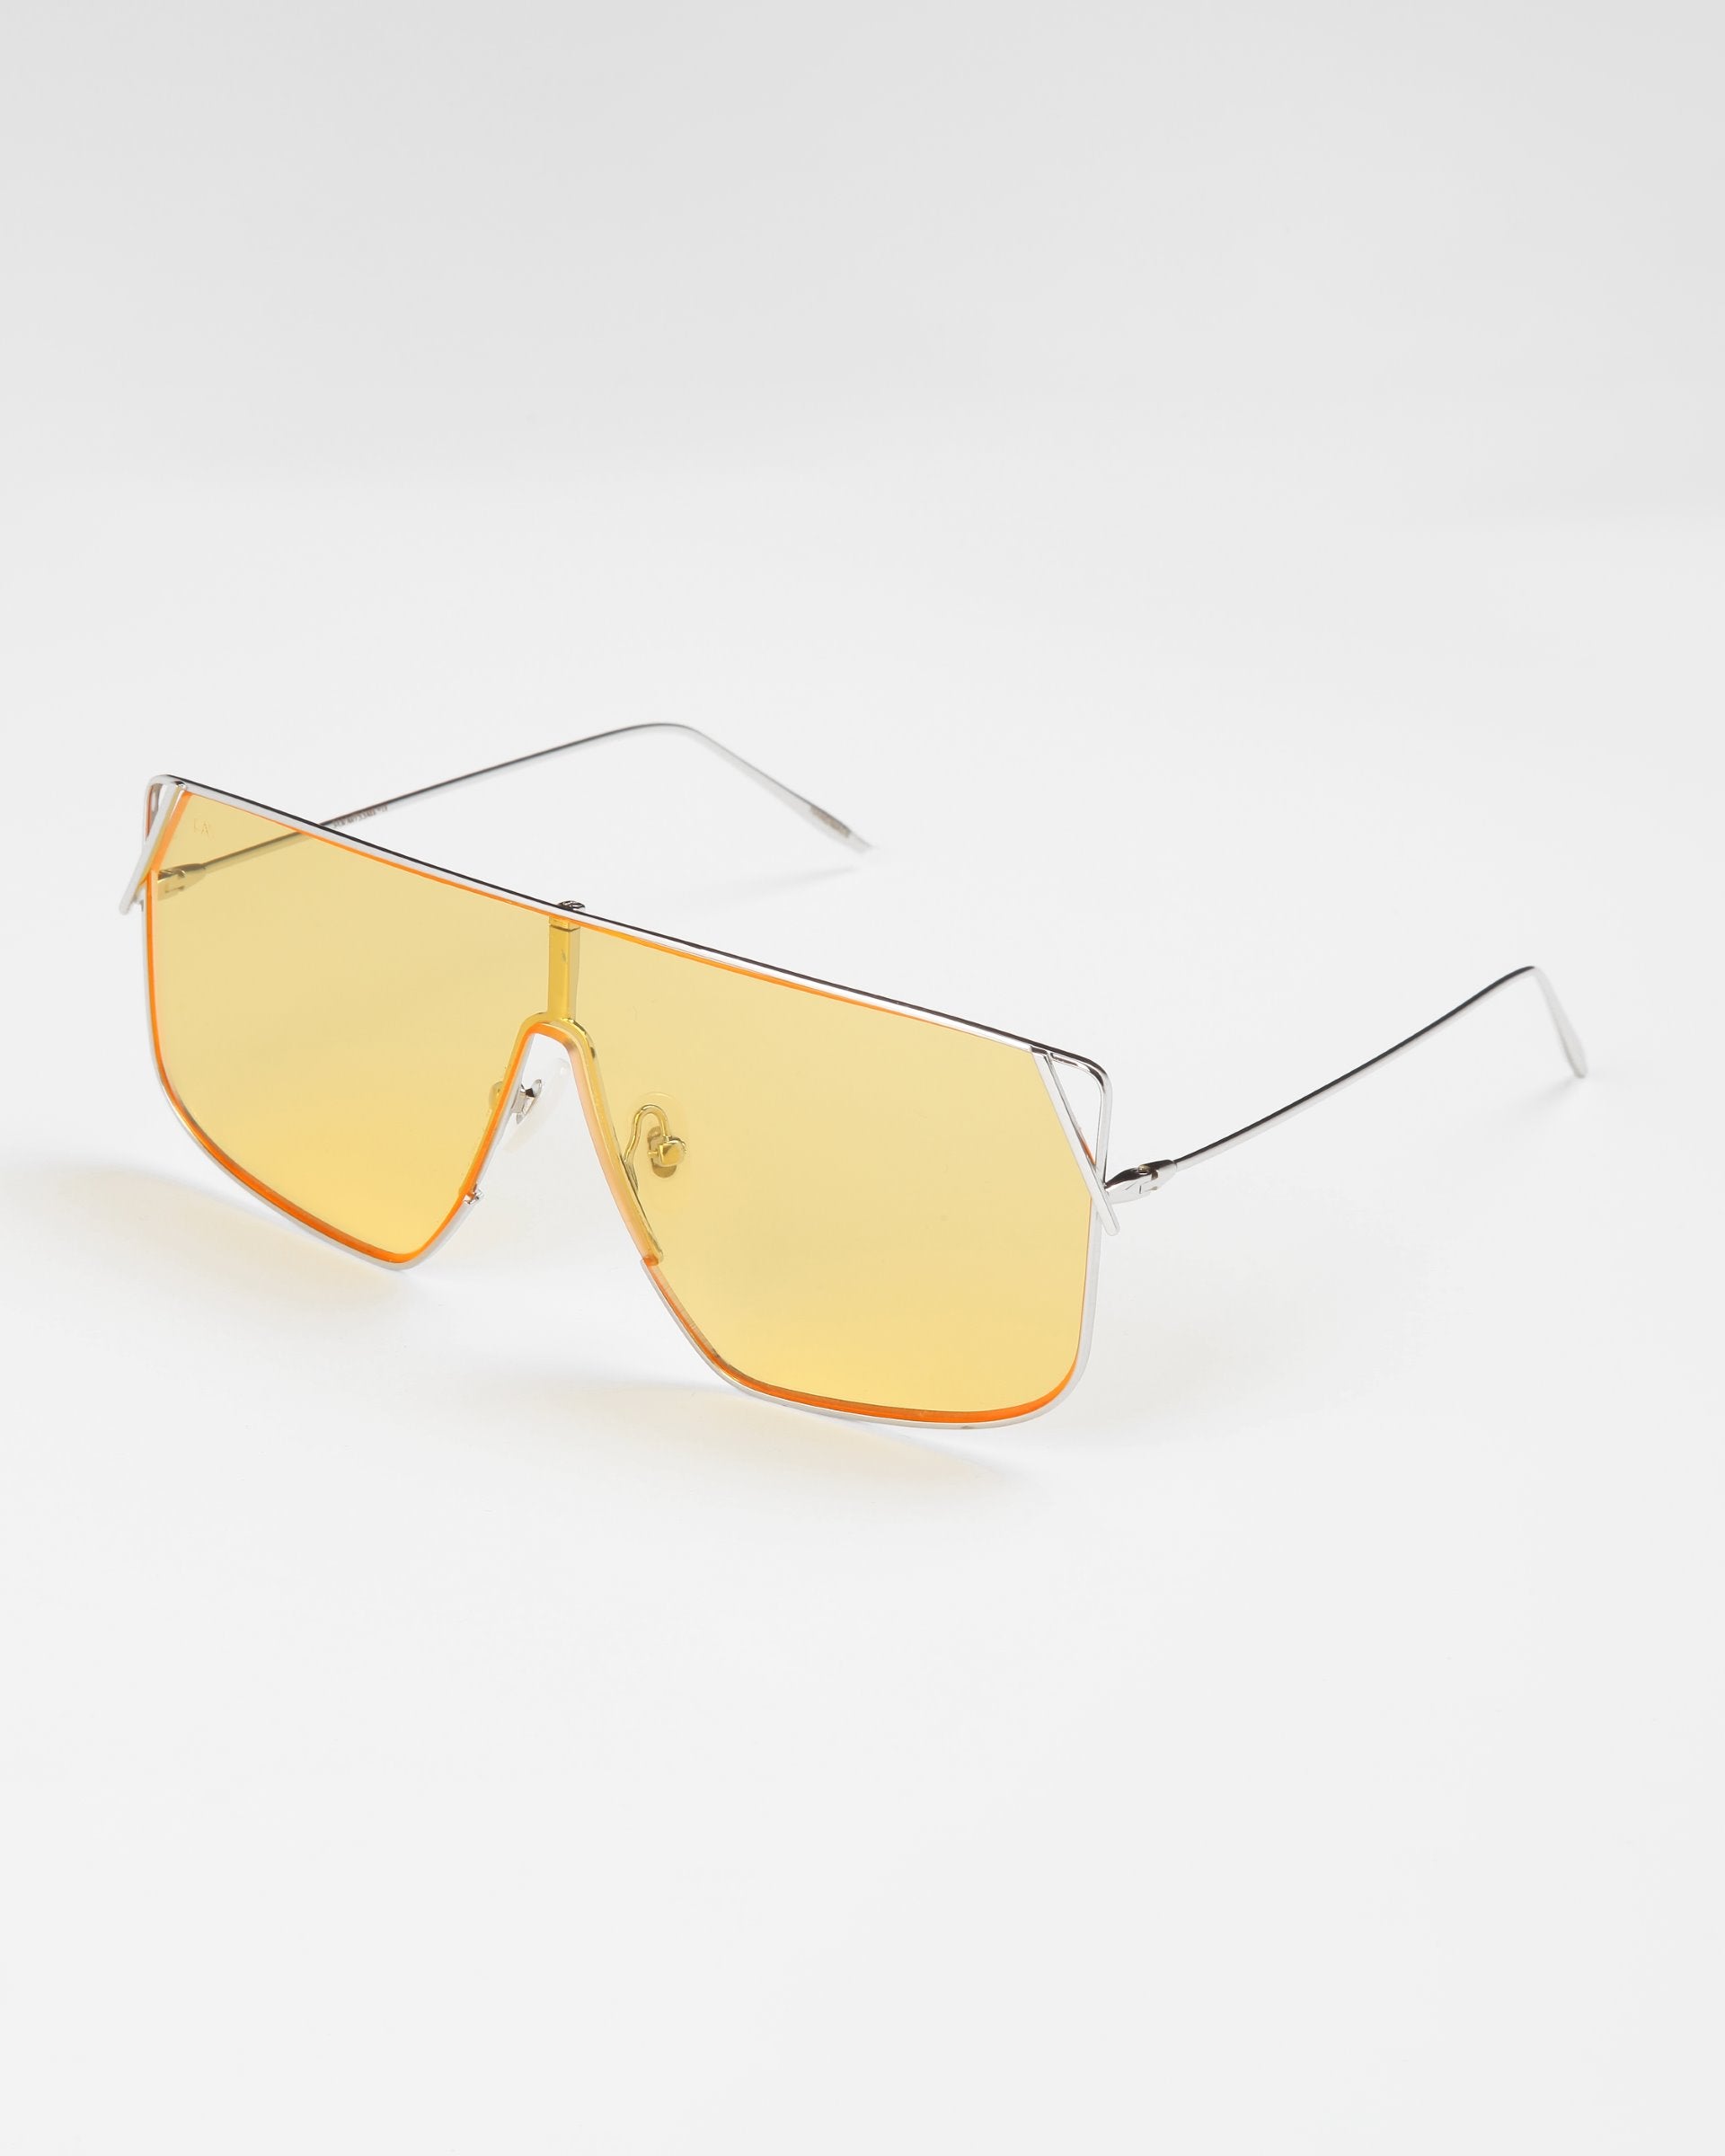 A pair of For Art&#39;s Sake® Horizon sunglasses with a stainless steel frame and large, rectangular yellow-tinted lenses is displayed against a plain white background. The design features a bridge bar, thin temple arms, and adjustable nosepads for added comfort.